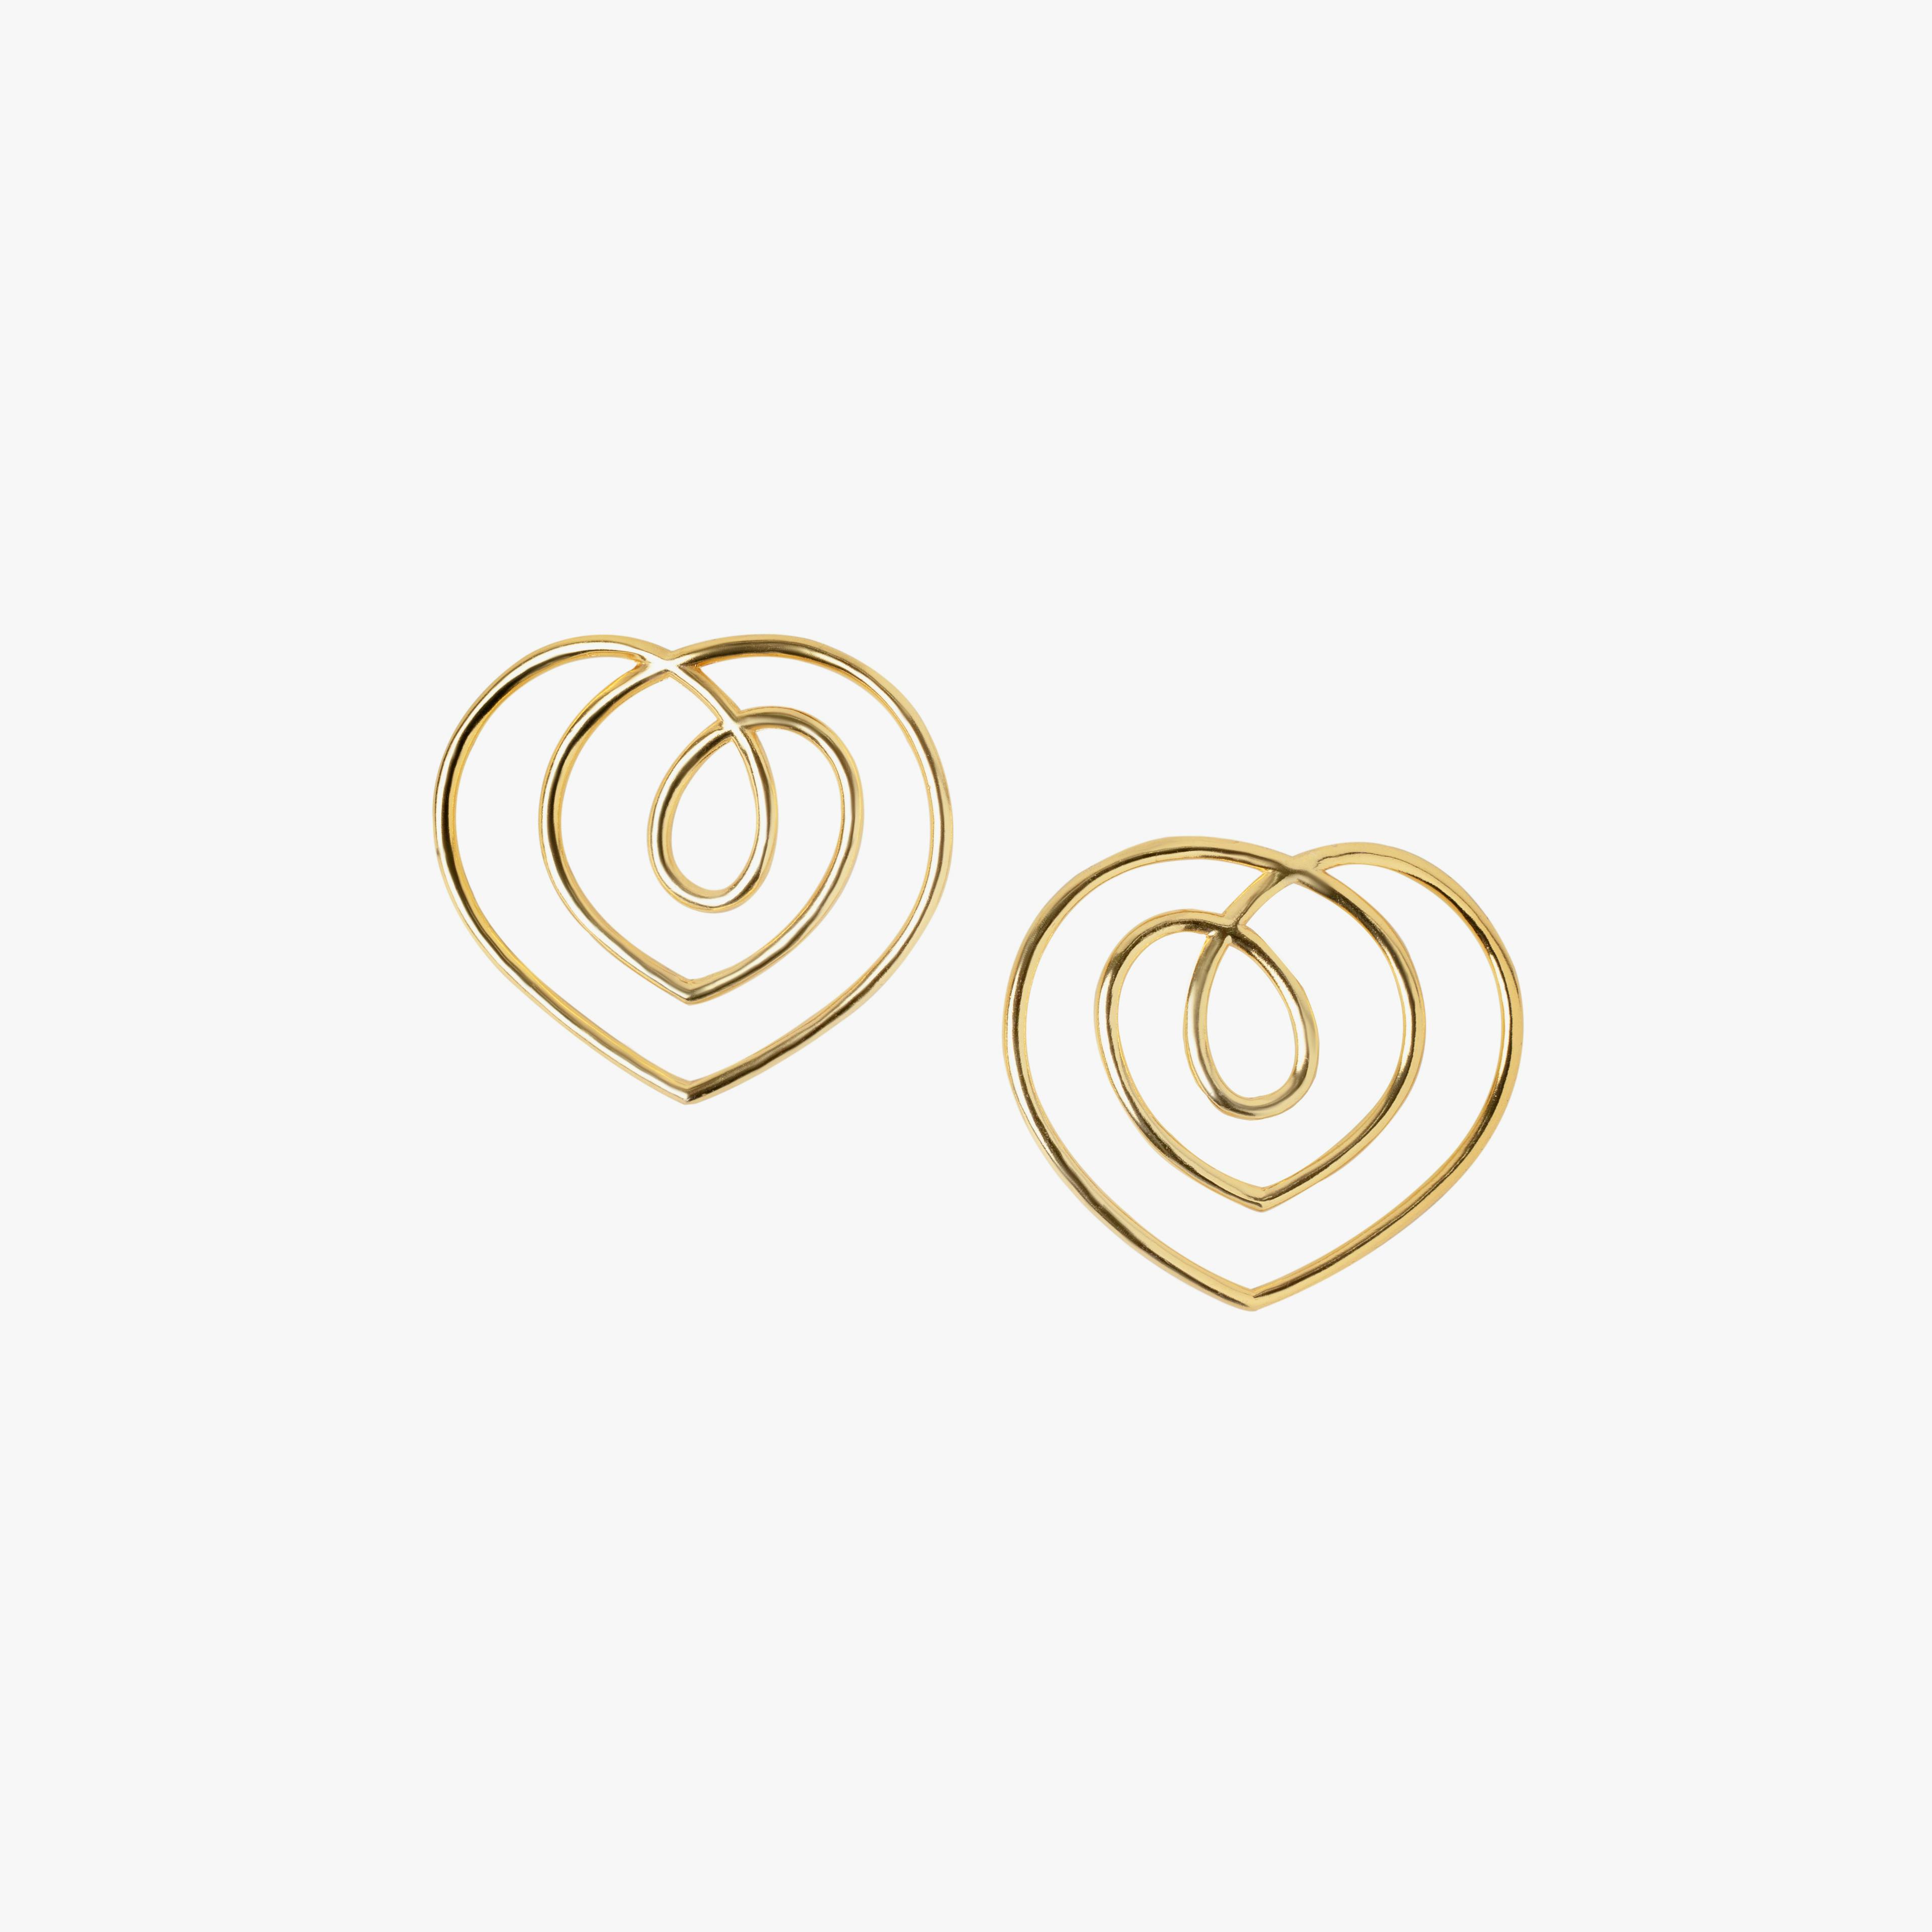 BEAU EARRINGS GOLD TONE, a product by Equiivalence